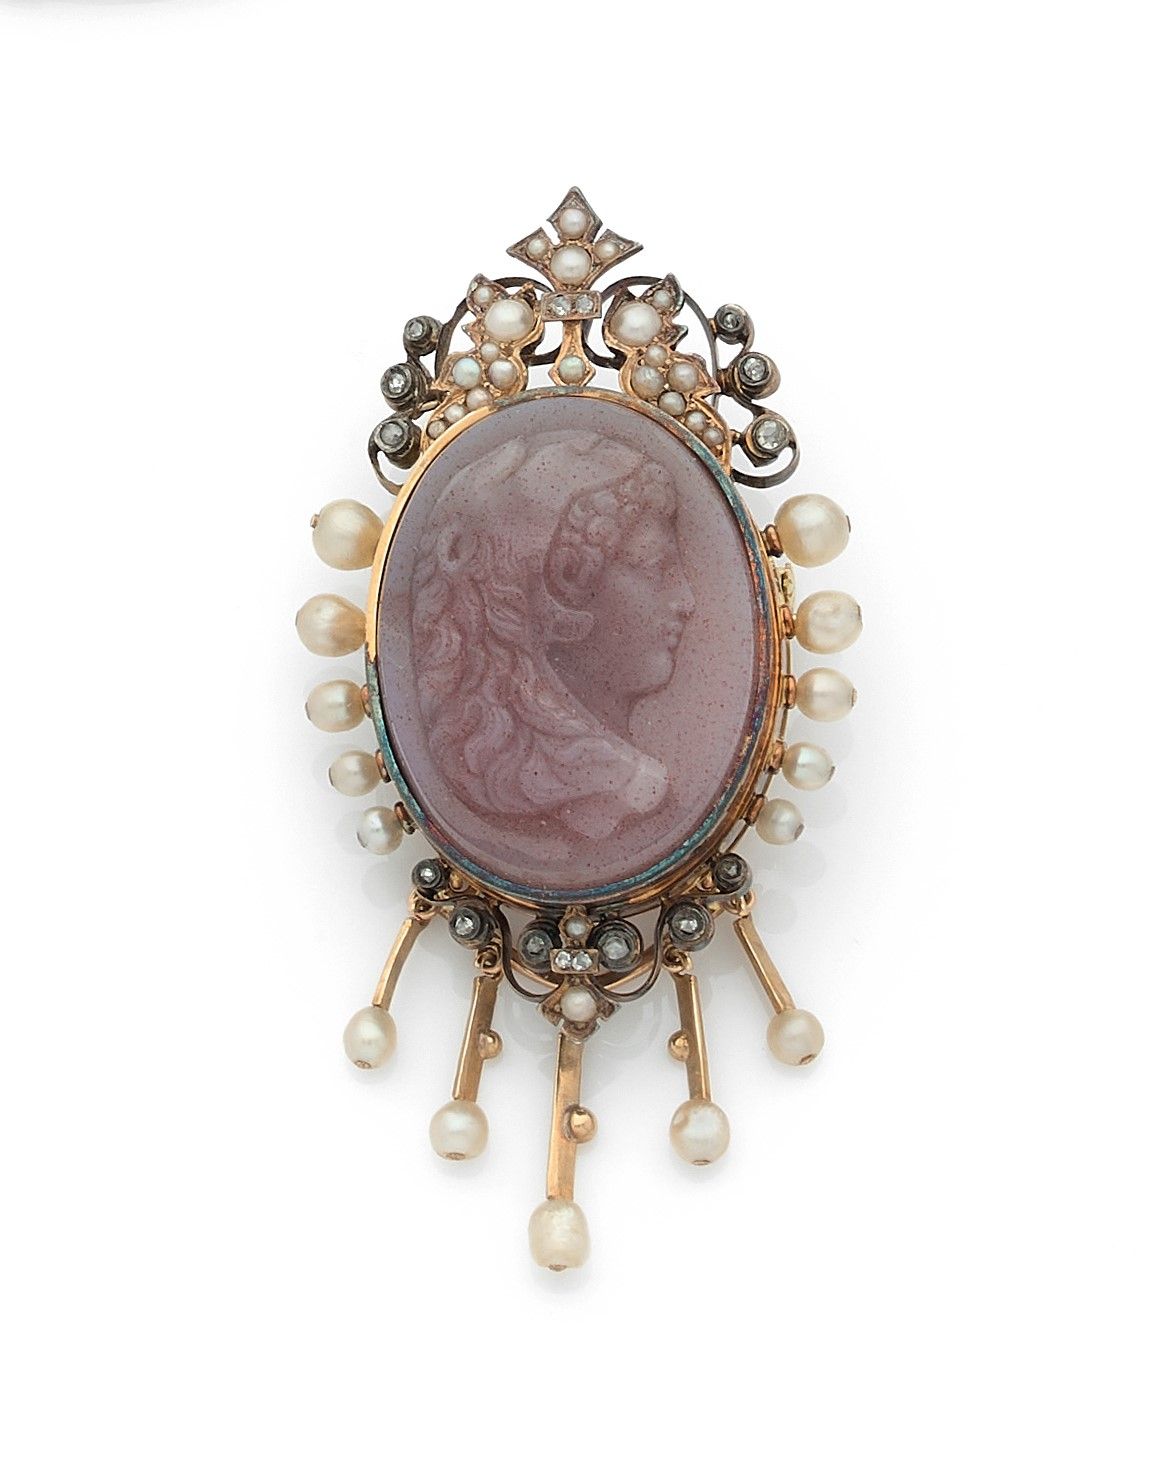 Null 
18K (750) gold and silver cameo brooch set with a carved portrait of Hercu&hellip;